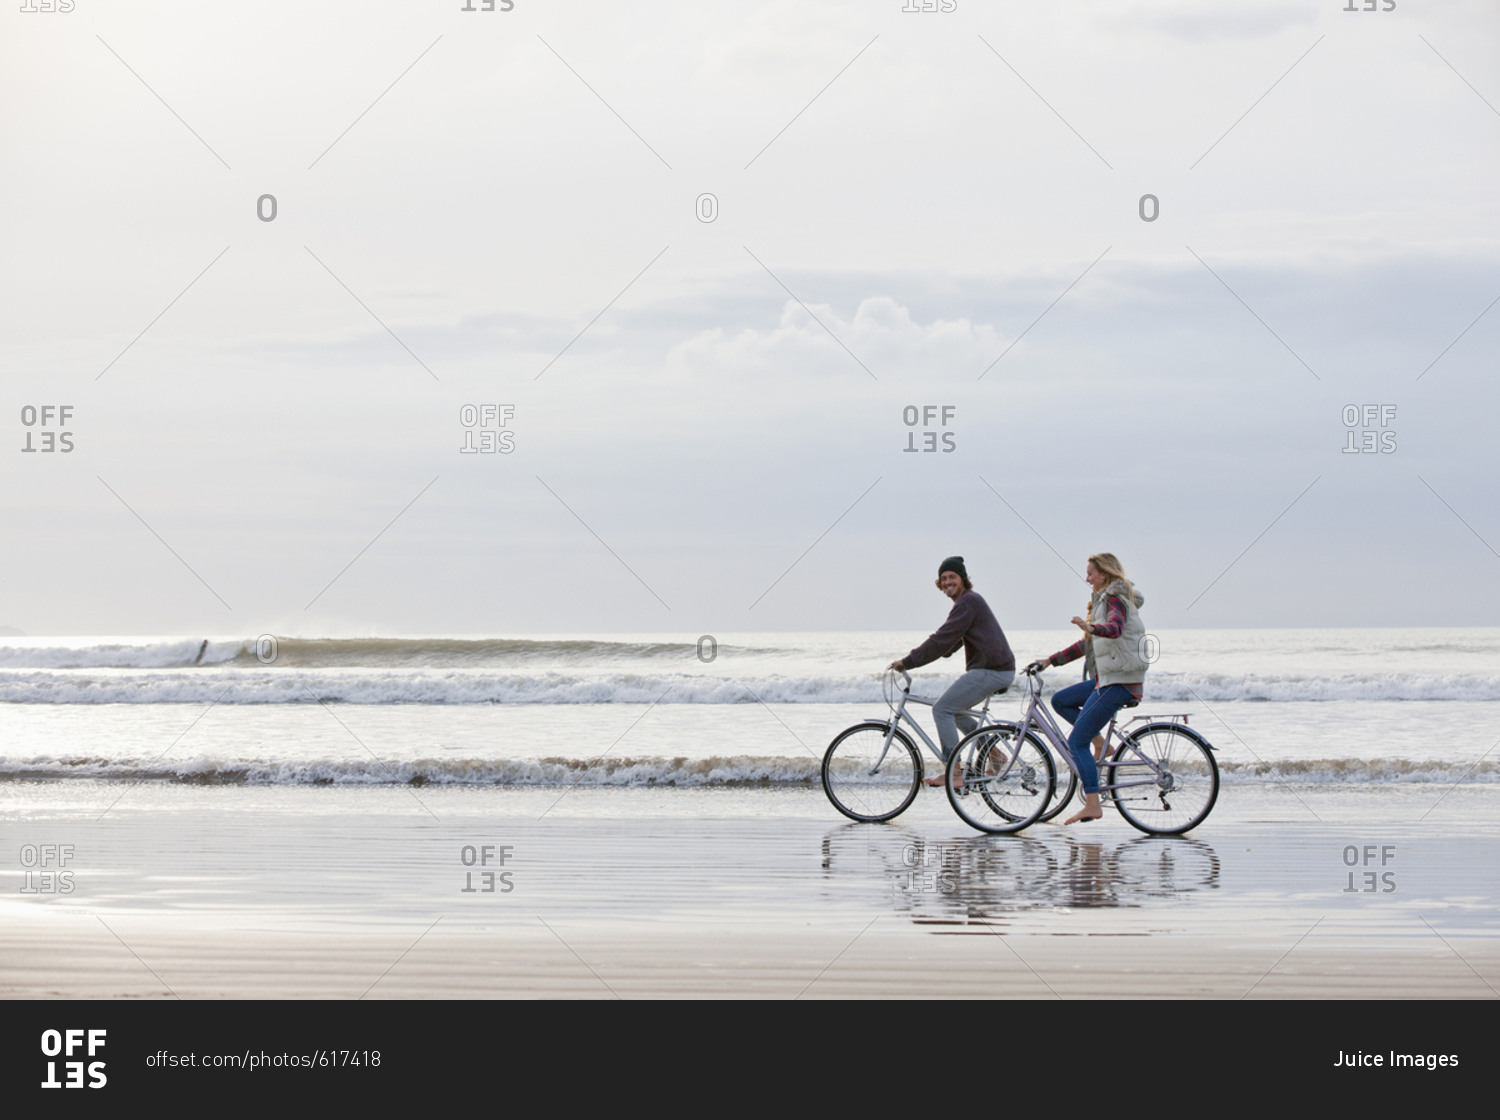 Couple riding bicycles in ocean surf